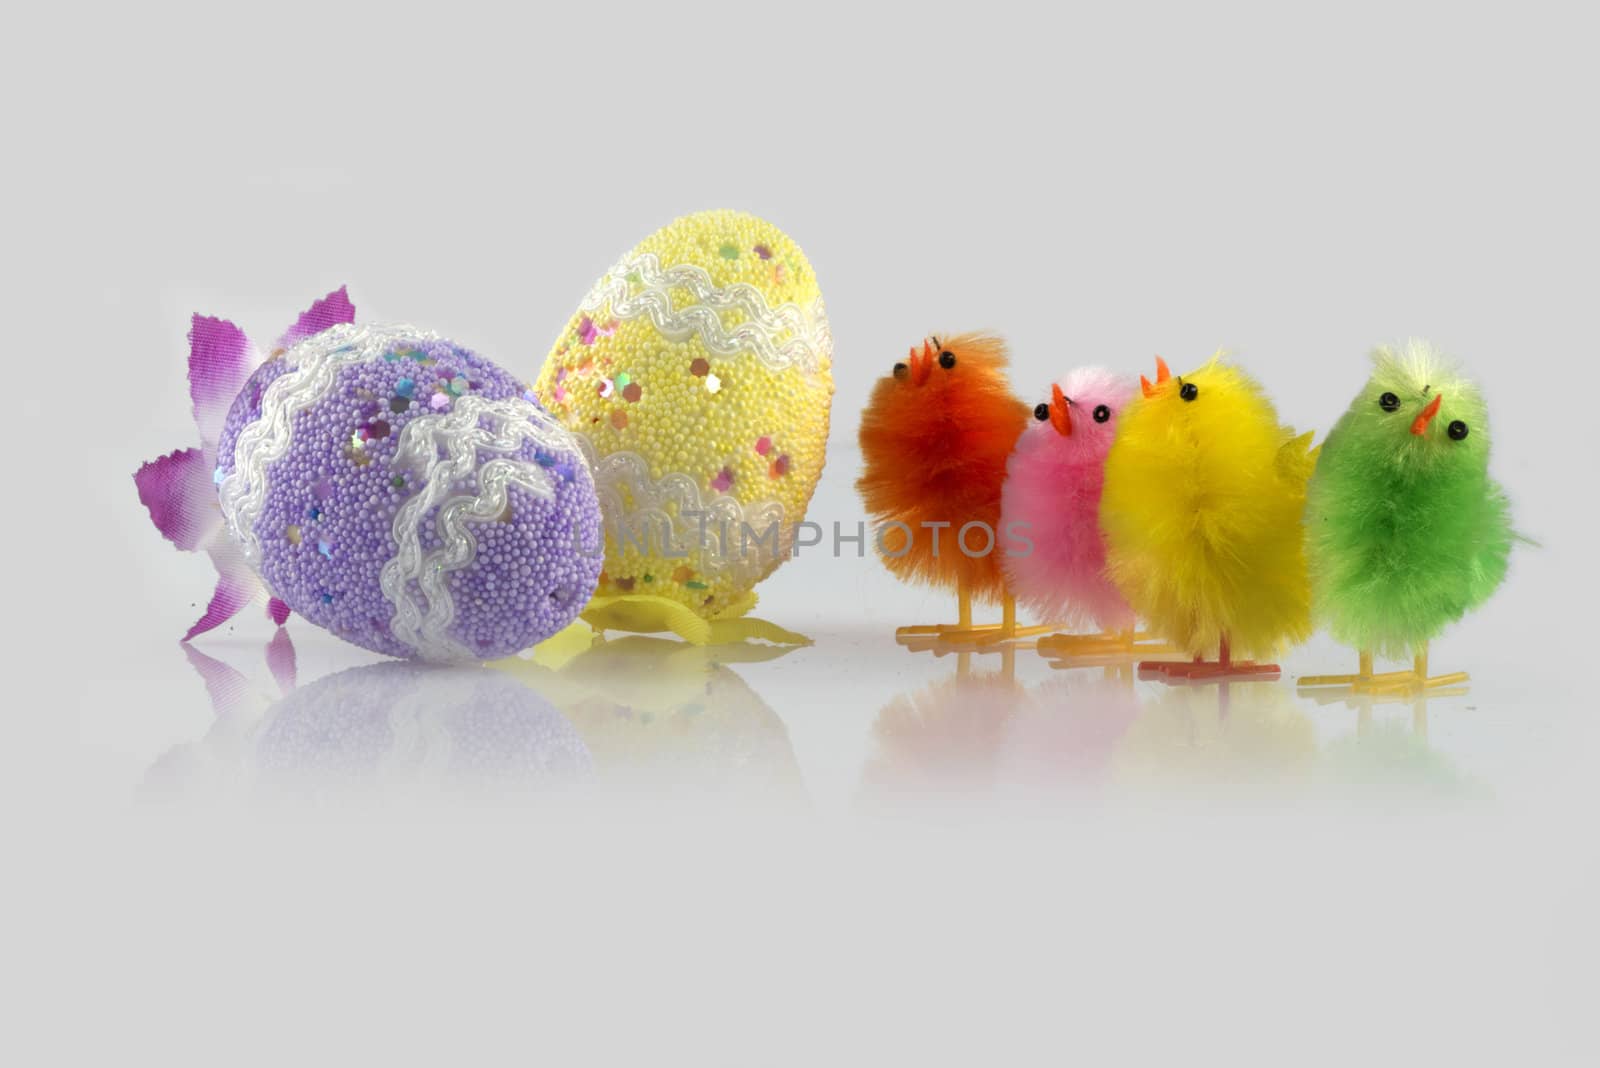 Four colour Easter chick and two eggs decorated in a light grey background